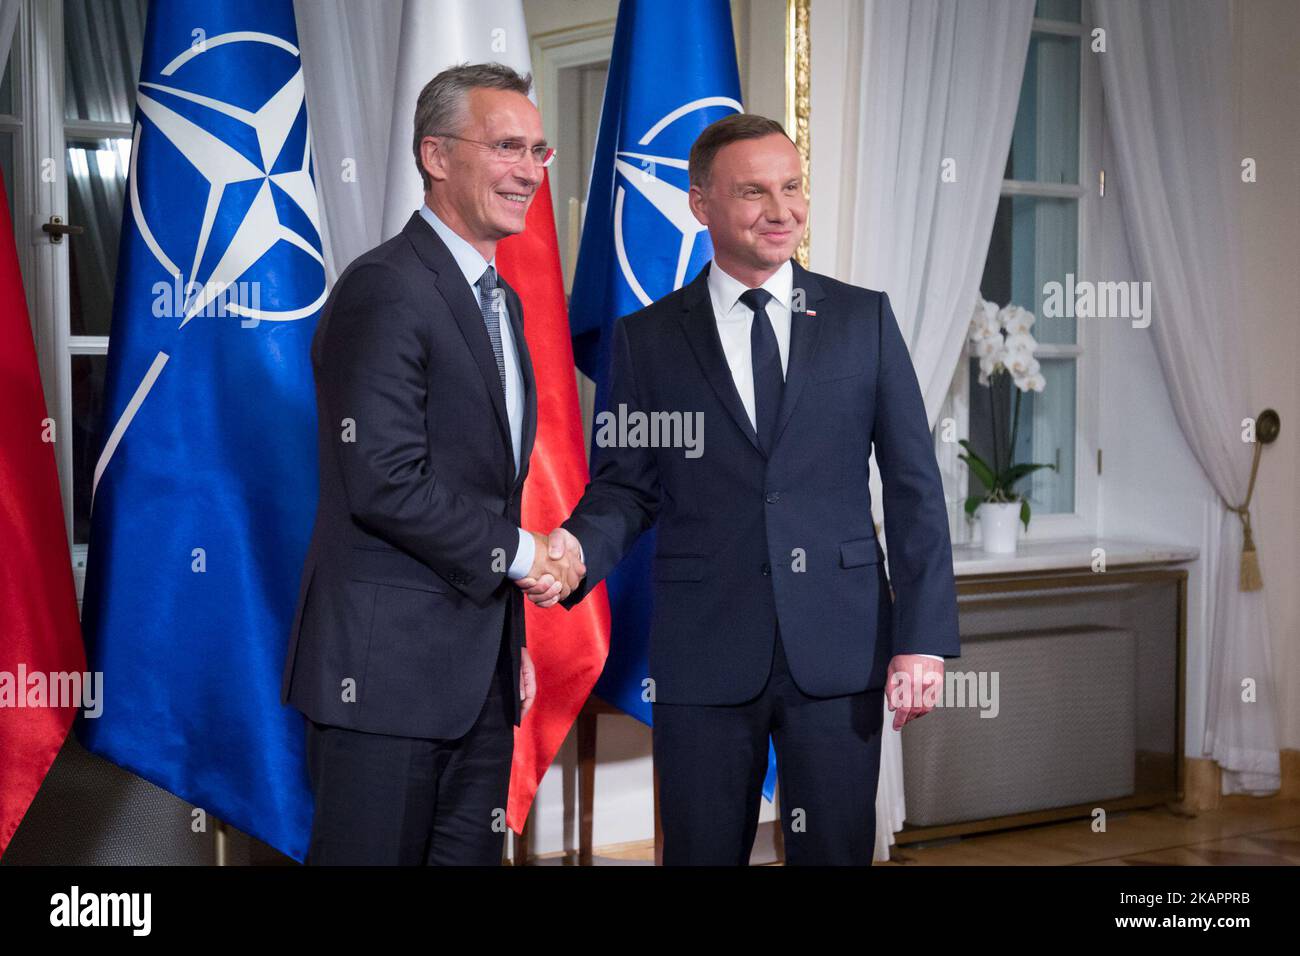 NATO Secretary General Jens Stoltenberg and President of Poland Andrzej Duda during a welcome ceremony before their meeting at Belweder Palace in Warsaw, Poland on 24 August 2017 (Photo by Mateusz Wlodarczyk/NurPhoto) Stock Photo